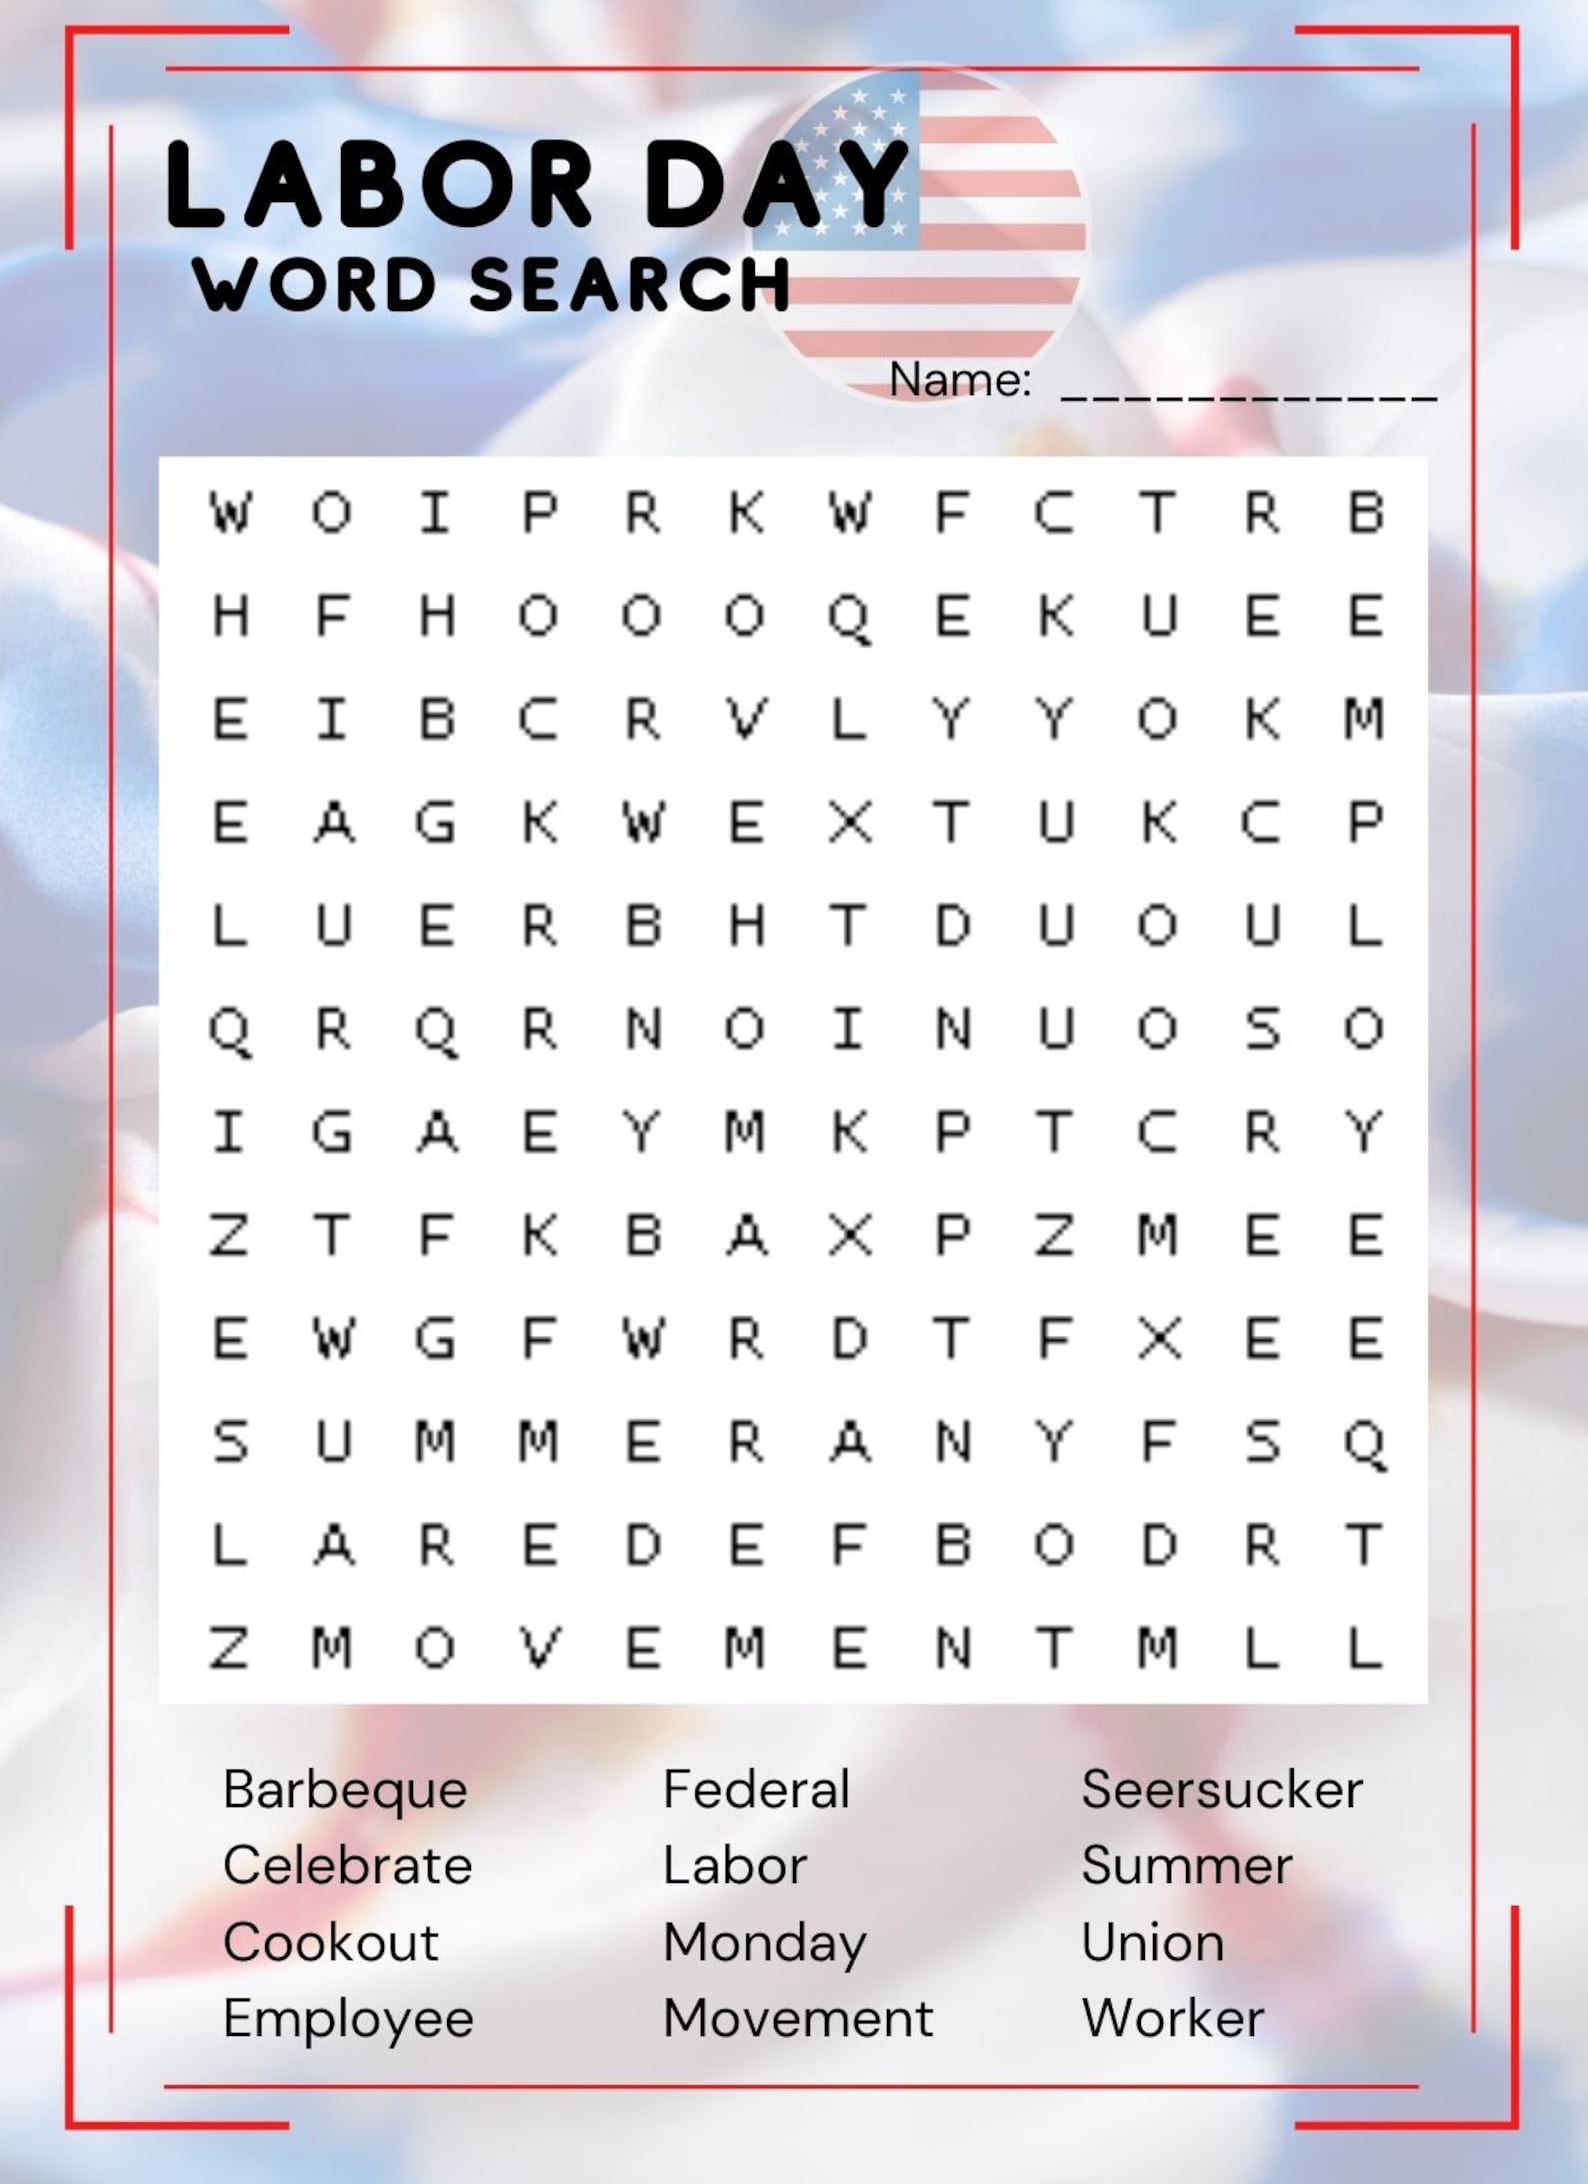 labor-day-word-search-instant-download-party-word-find-etsy